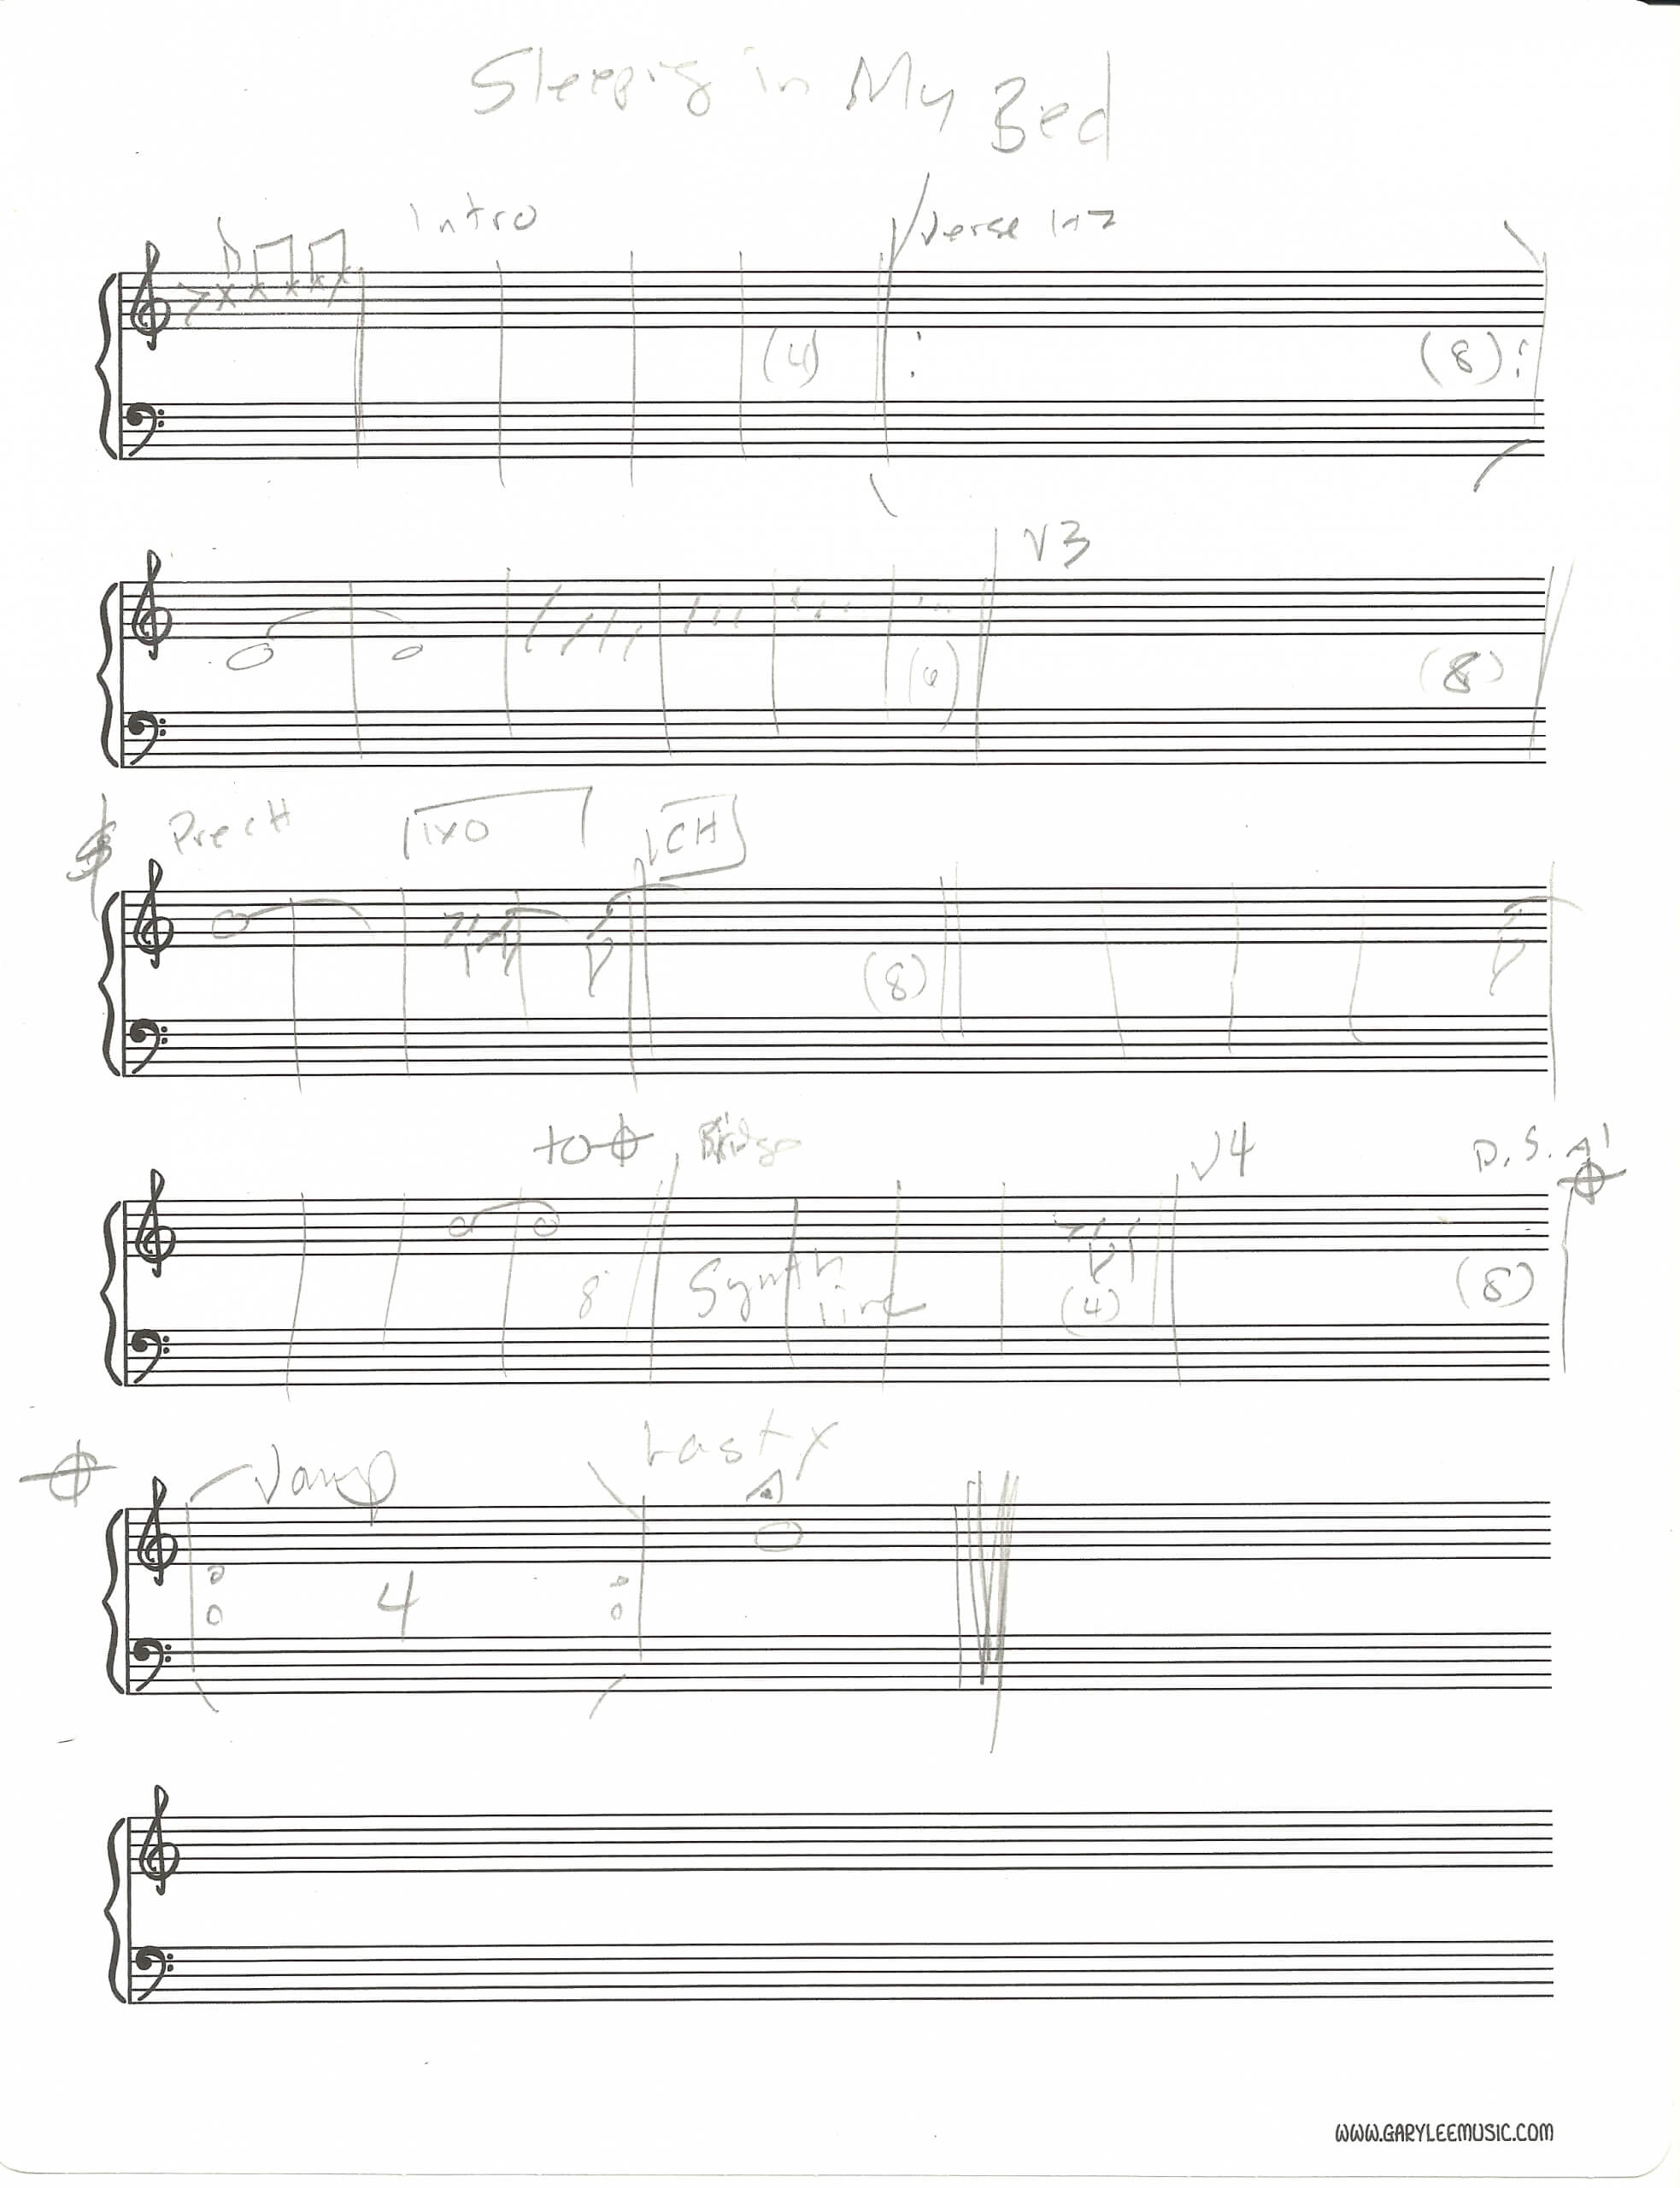 Sheet Music Template Blank For Word Free Pdf Spreadsheet Pertaining To Blank Sheet Music Template For Word